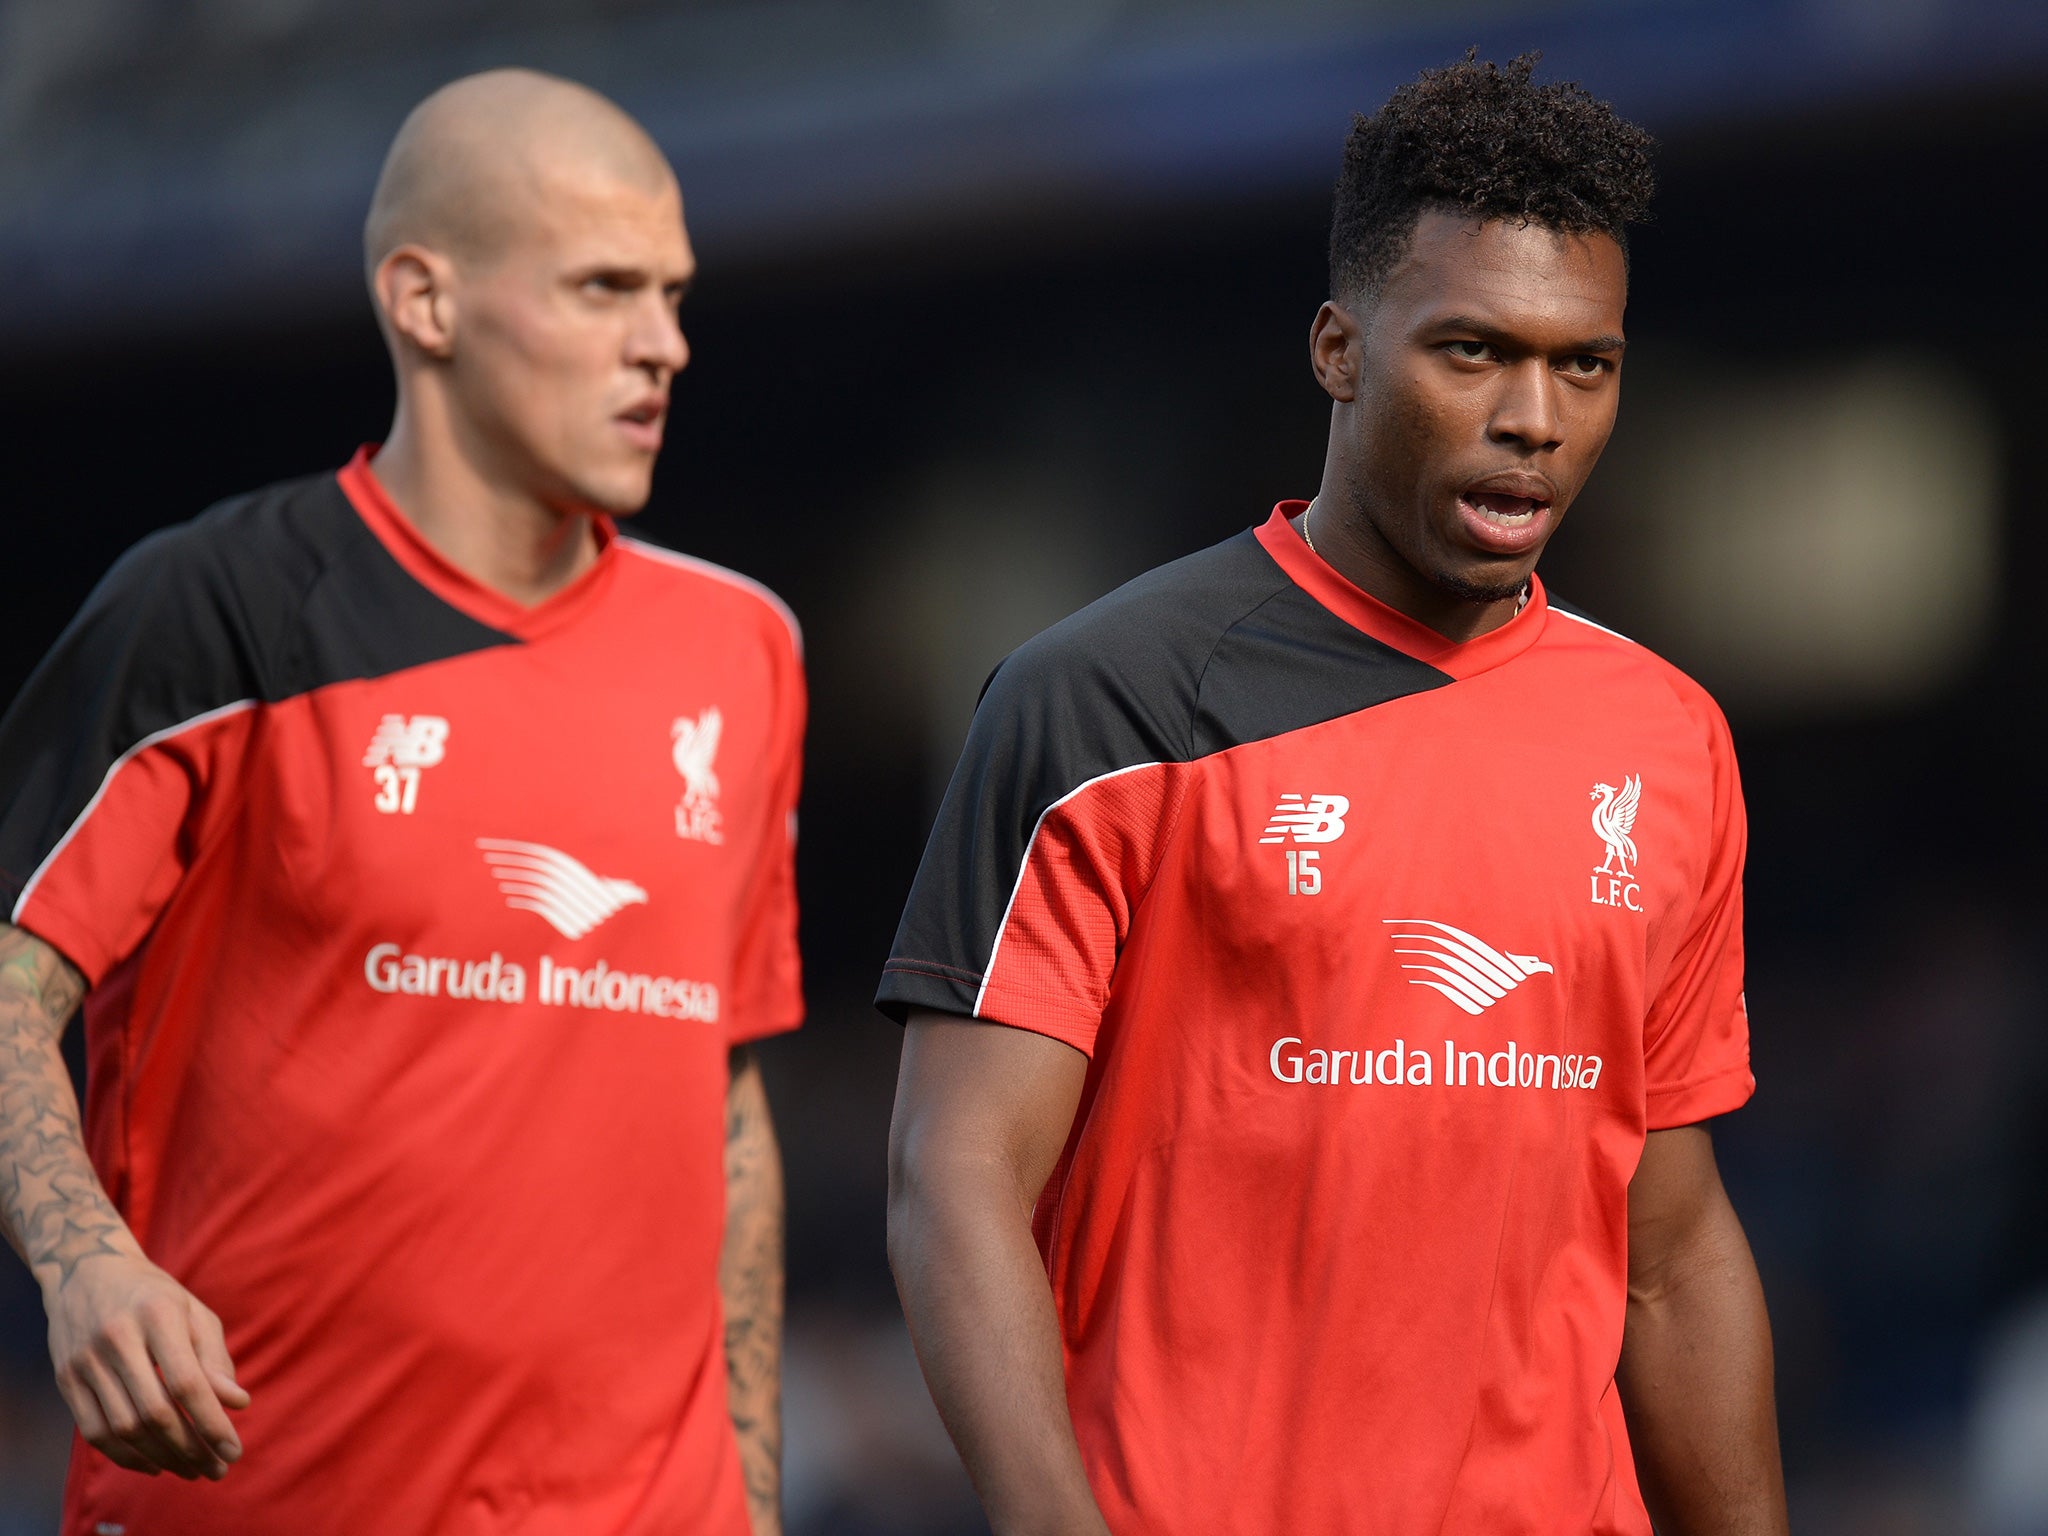 Daniel Sturridge, who has had a series of injury problems, has missed Liverpool’s last two matches